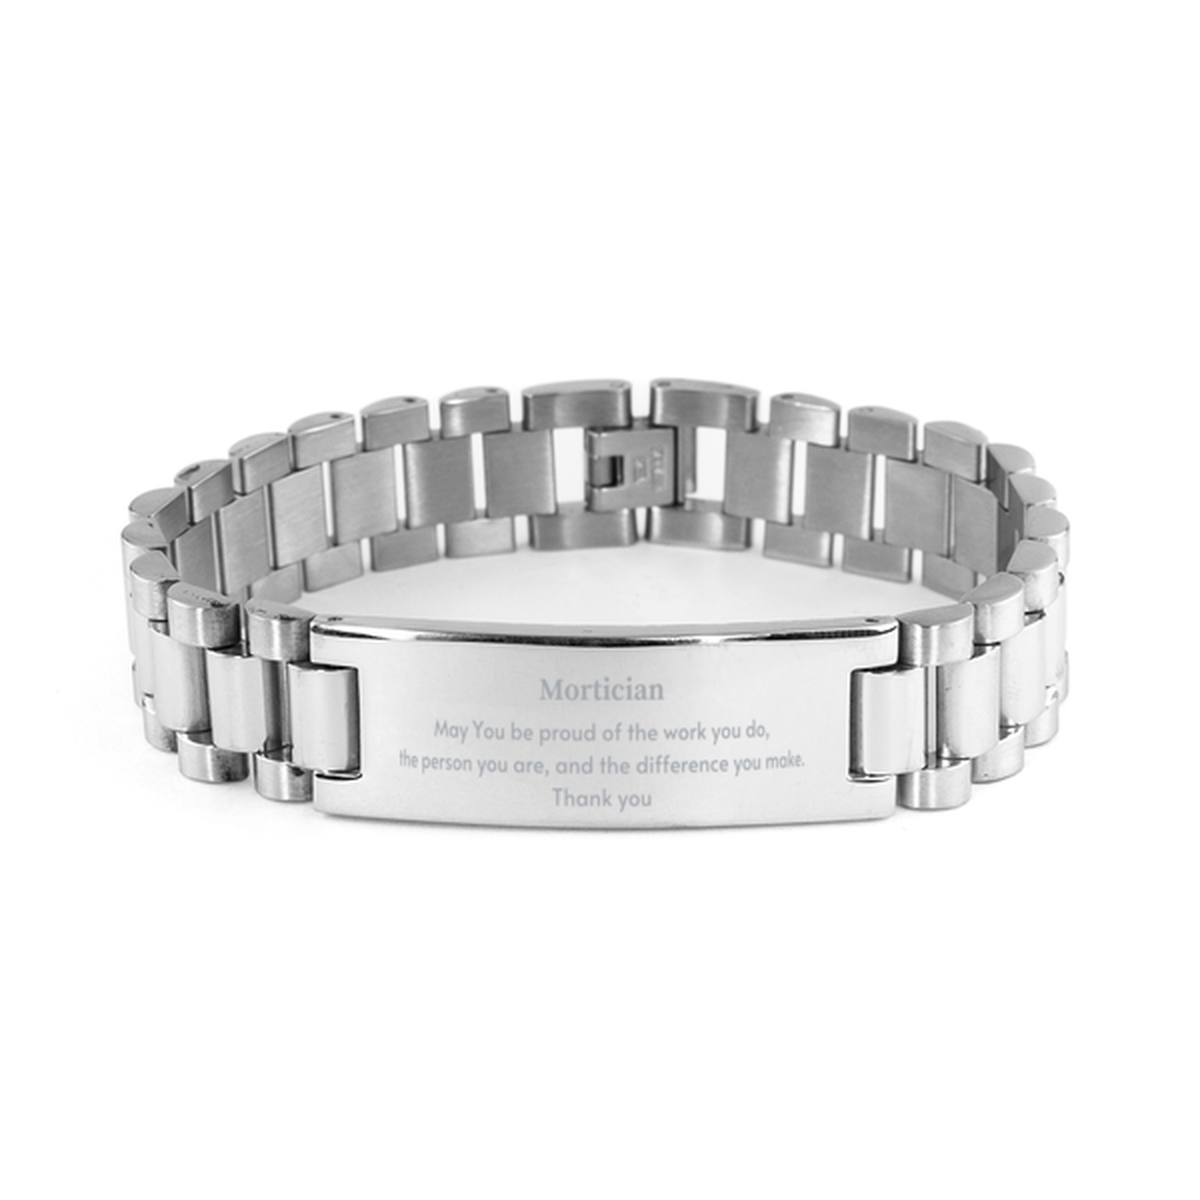 Heartwarming Ladder Stainless Steel Bracelet Retirement Coworkers Gifts for Mortician, Mortician May You be proud of the work you do, the person you are Gifts for Boss Men Women Friends